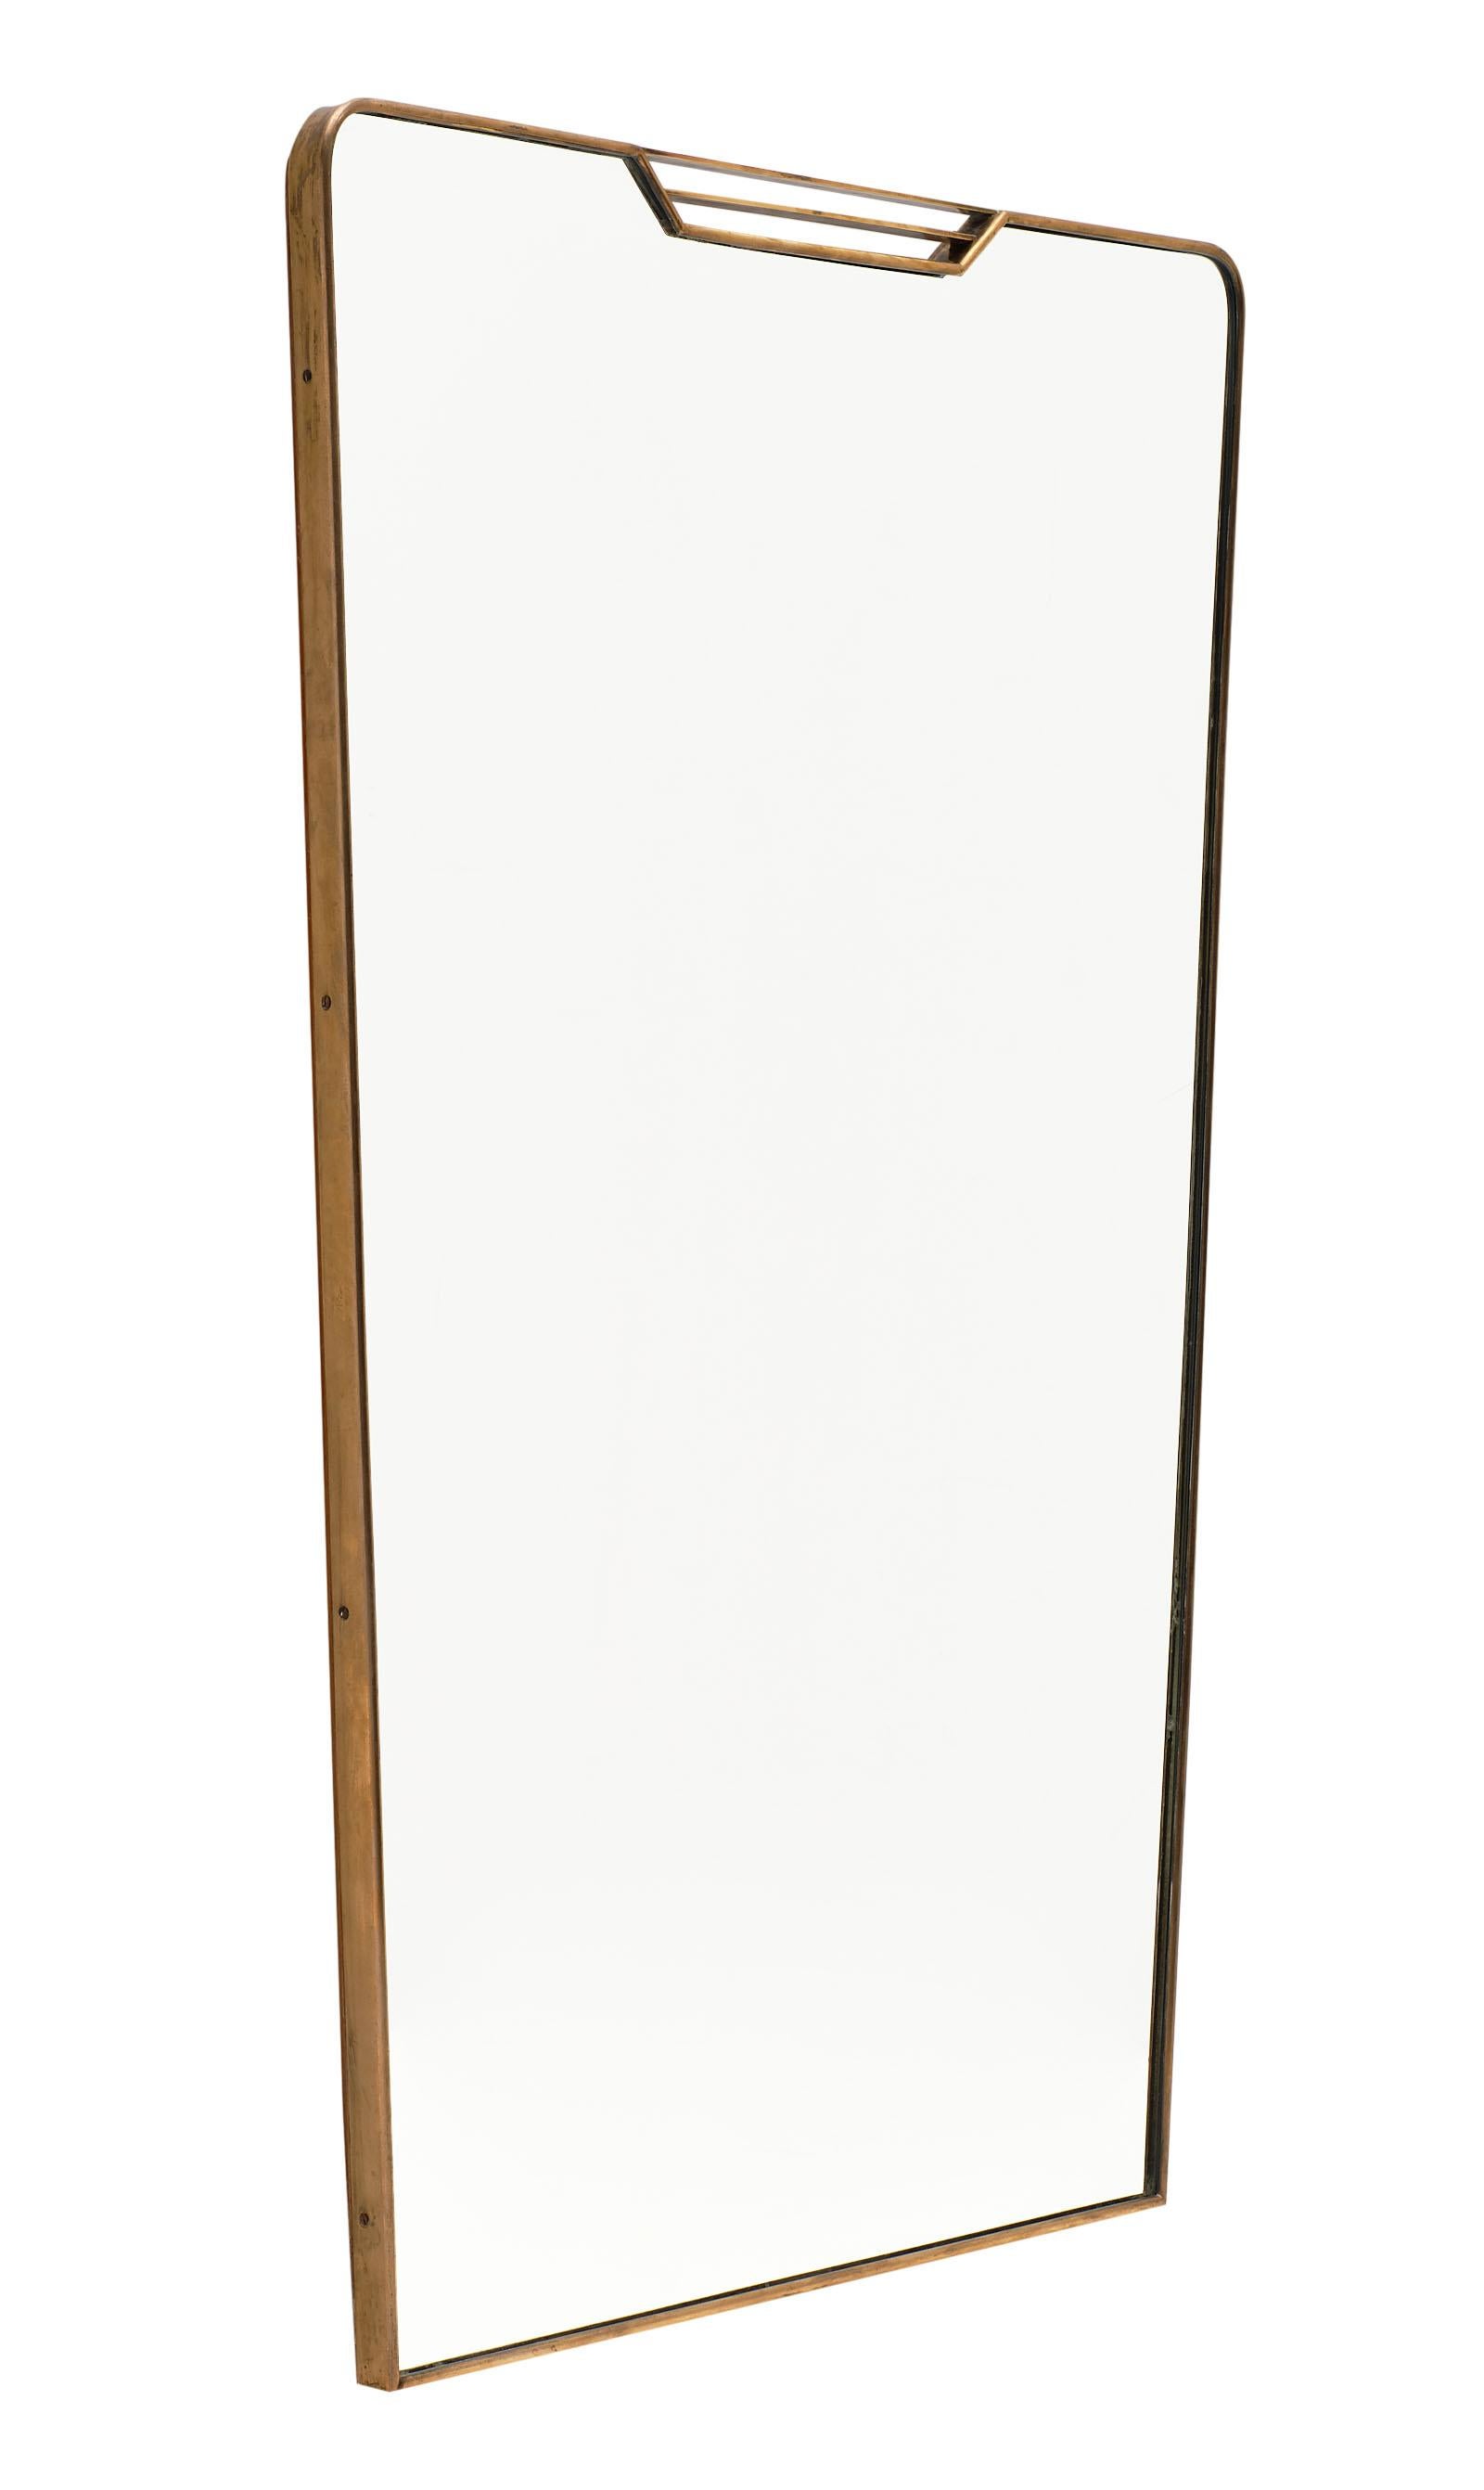 Midcentury Italian mirror in the style of Paolo Buffa. This vintage piece is all original, with a brass structure and tapered shape. A great design!